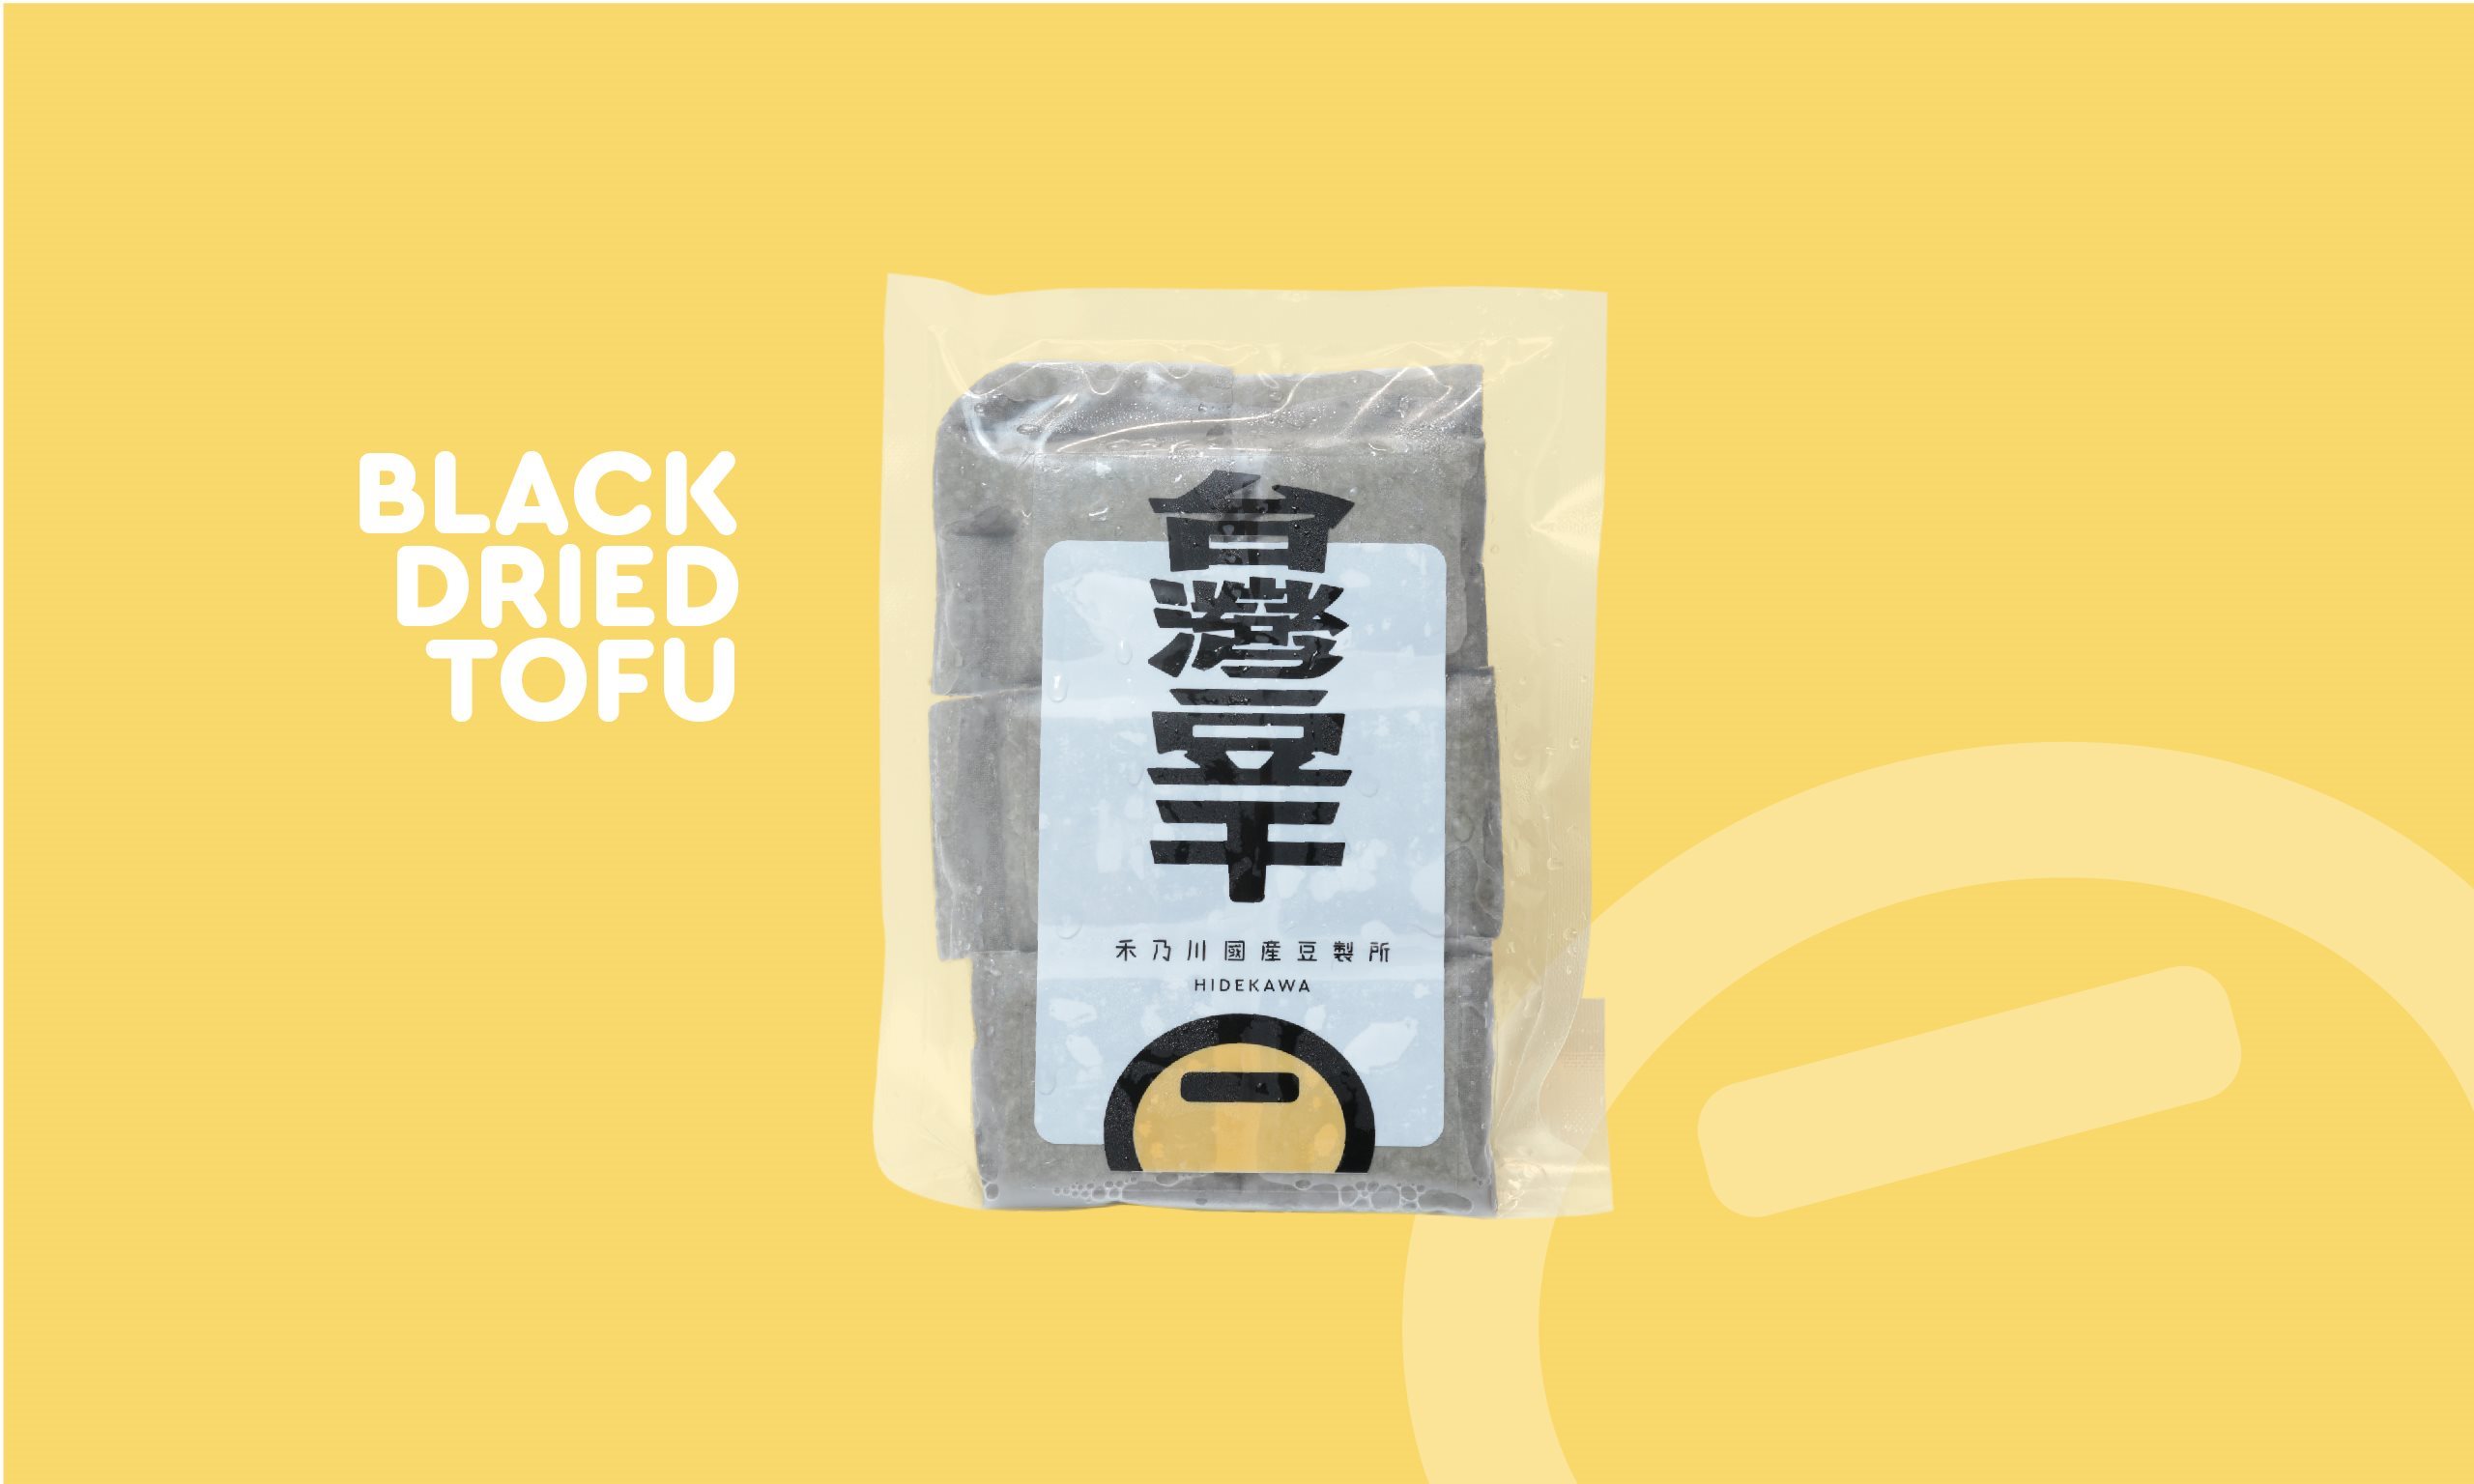 Dried Black Tofu with Bittern - Best handmade Tofu with non-GMO soybeans in Taiwan